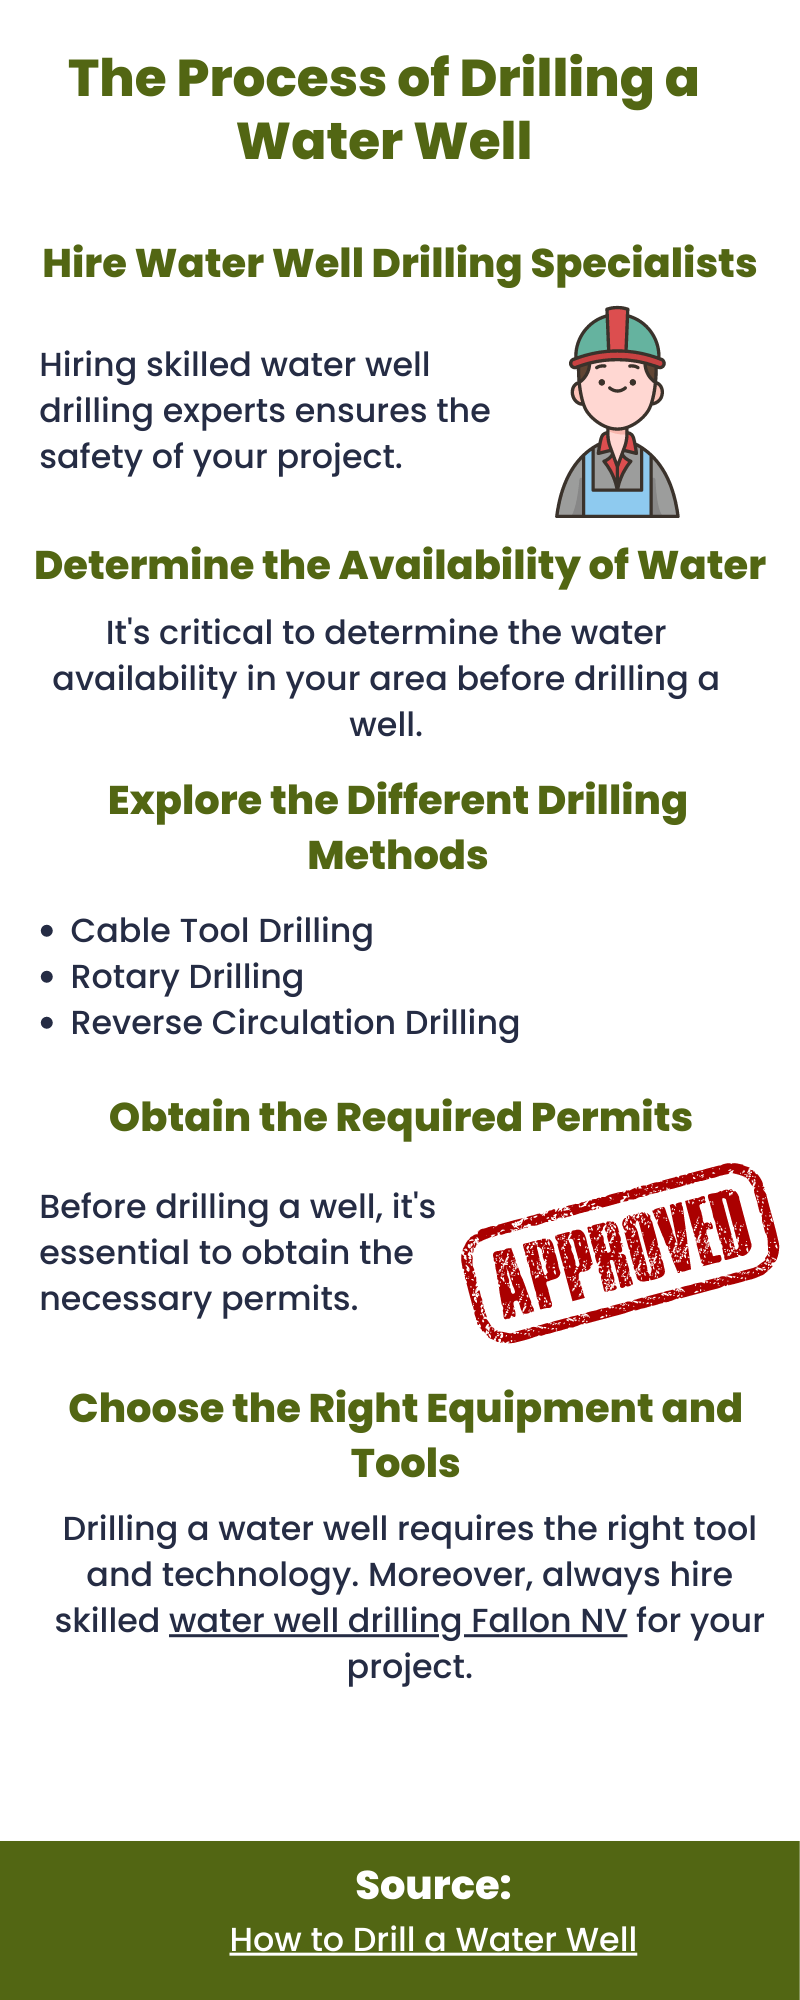 The Process of Drilling a Water Well